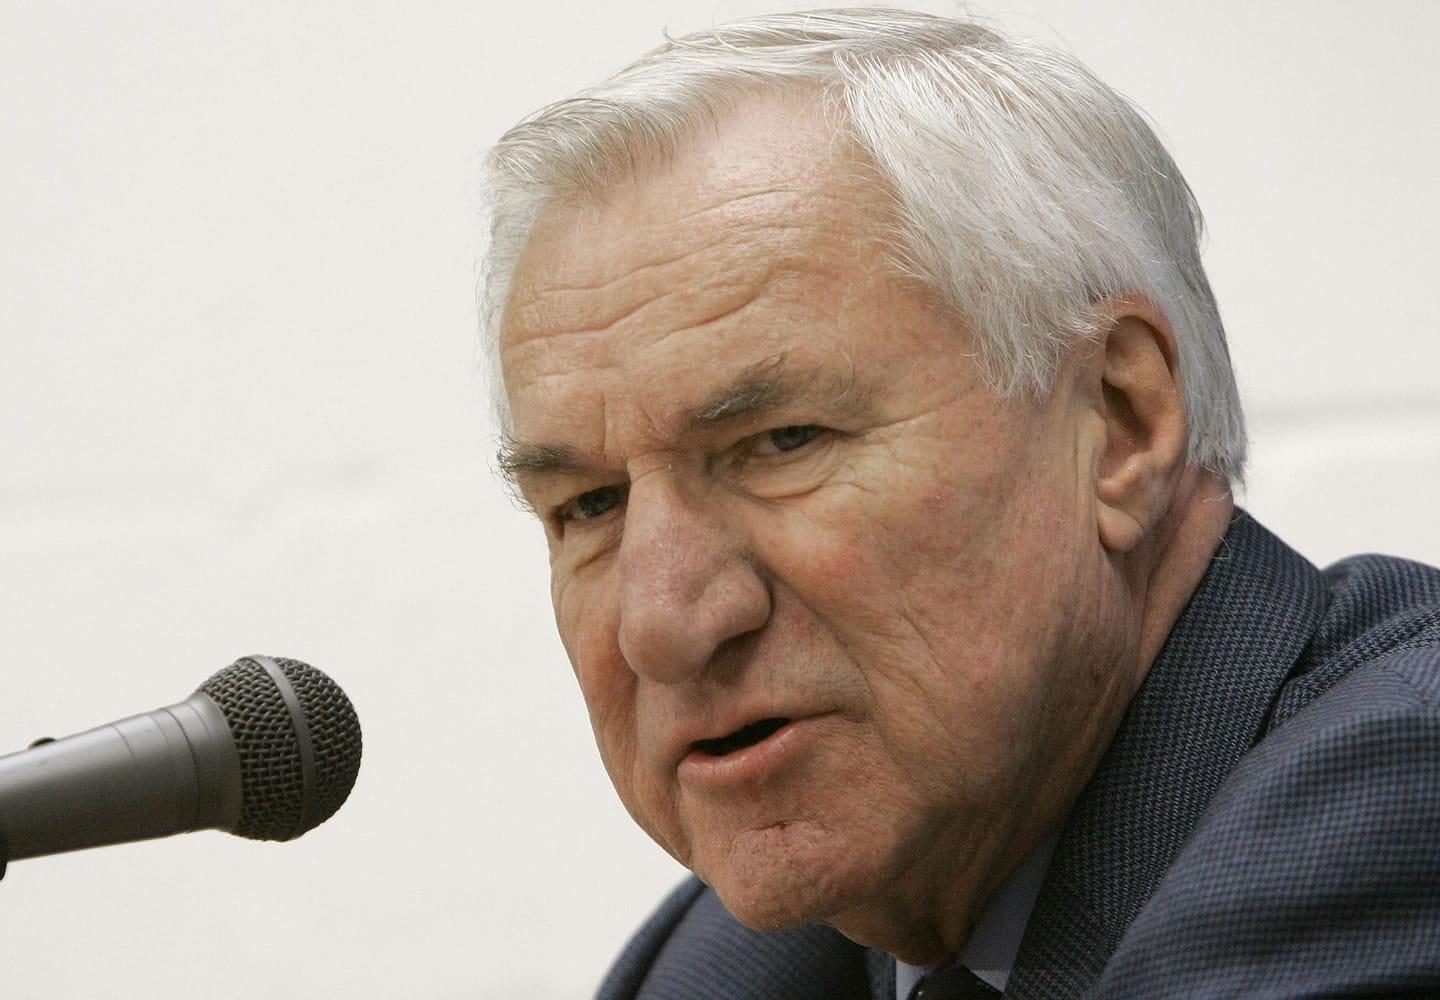 Former North Carolina basketball coach Dean Smith, pictured here 2006, died &quot;peacefully&quot; at his home Saturday night, Feb. 7, 2015, the school said in a statement Sunday from Smith's family. He was 83.